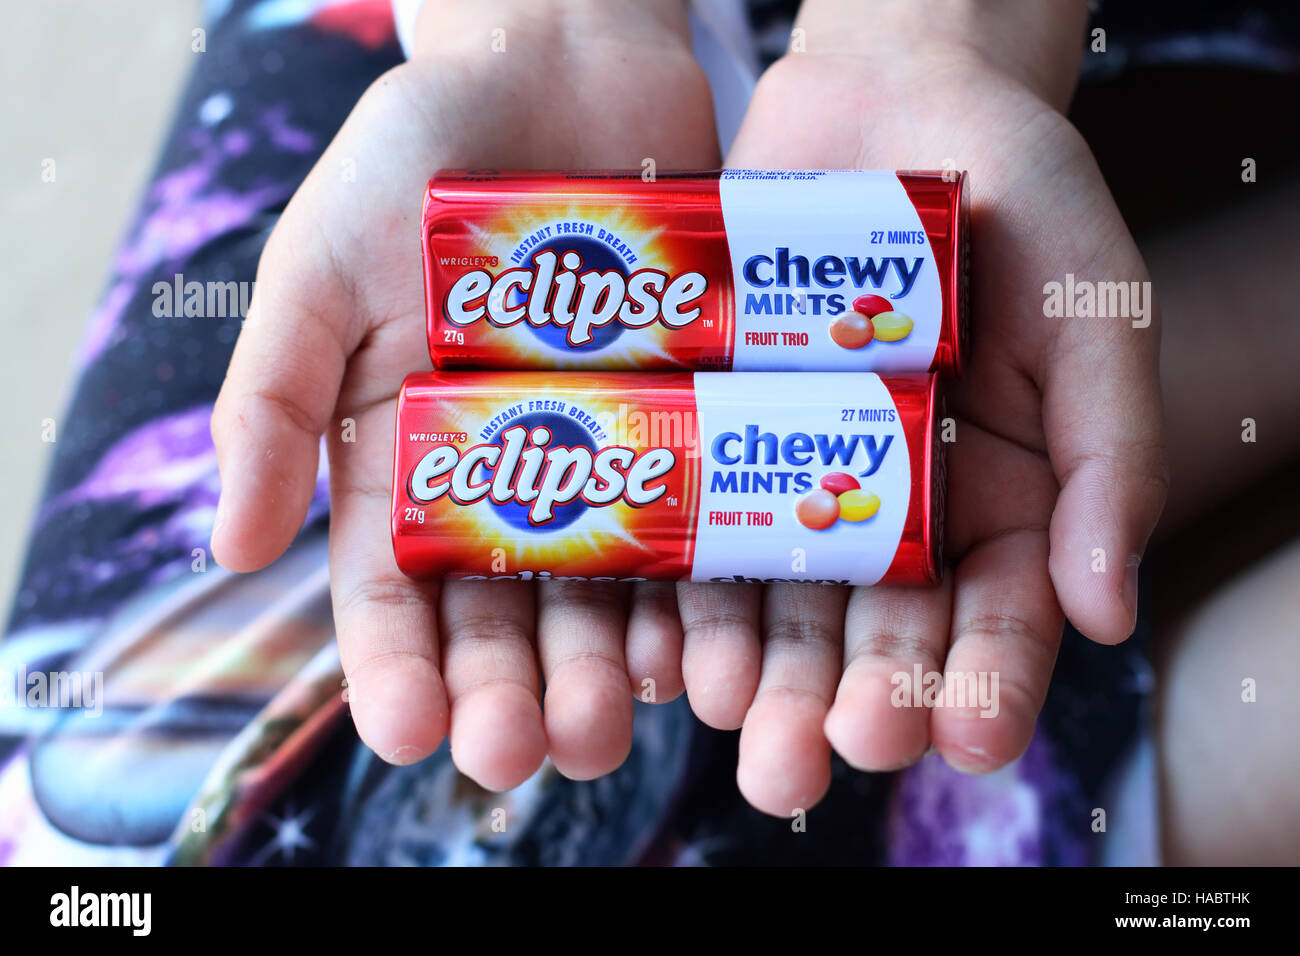 A child hand holding Australian Eclipse Chewy Mints Stock Photo